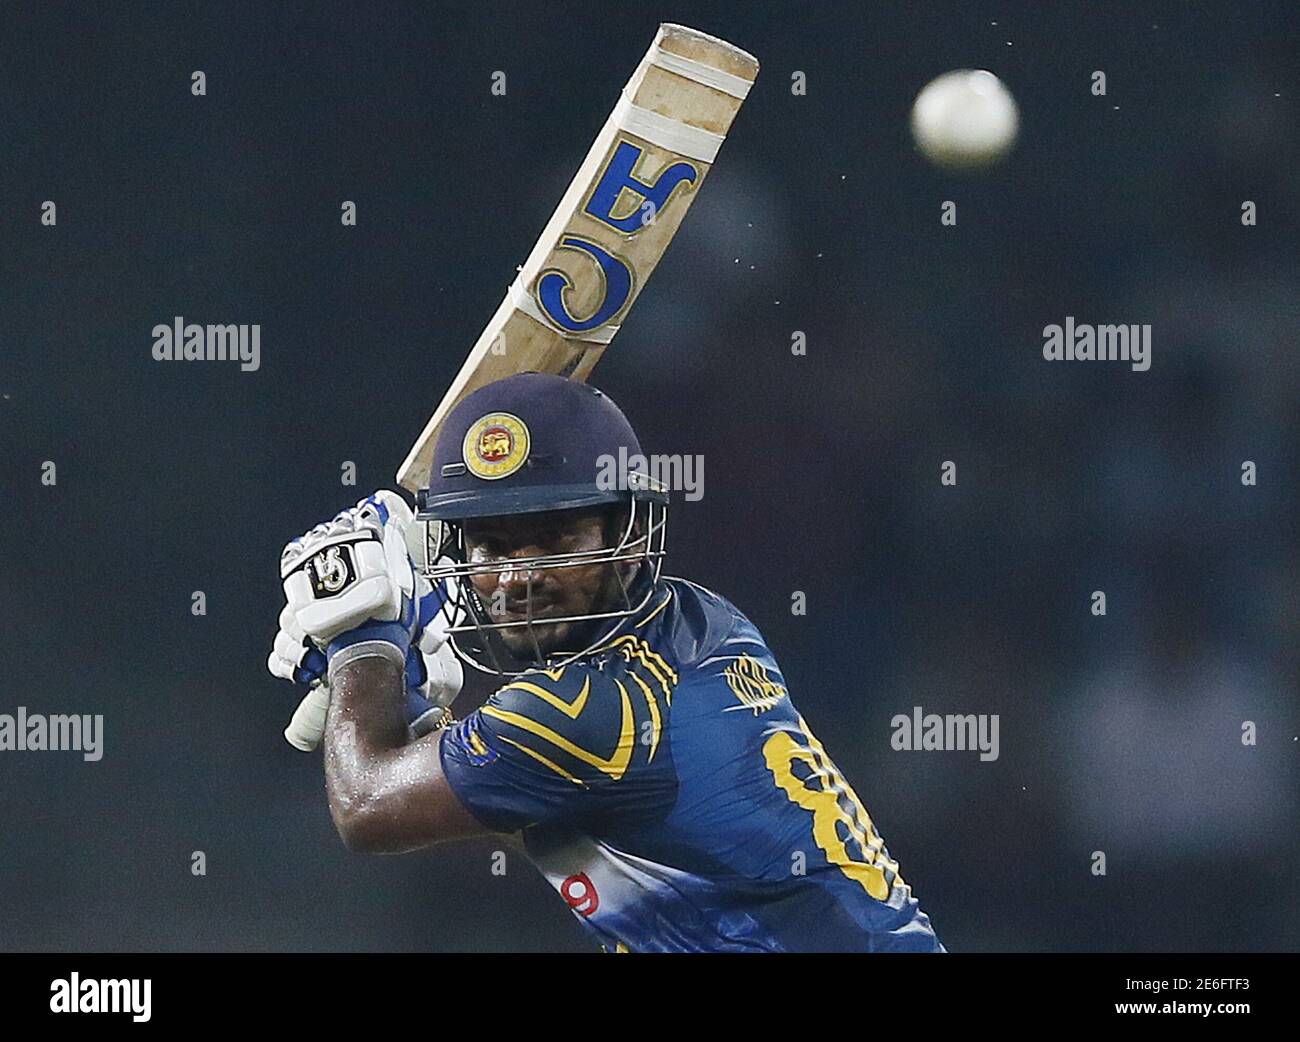 Sri Lanka's Kusal Perera hits a boundary during the second One Day International cricket match against West Indies in Colombo November 4, 2015. REUTERS/Dinuka Liyanawatte Stock Photo